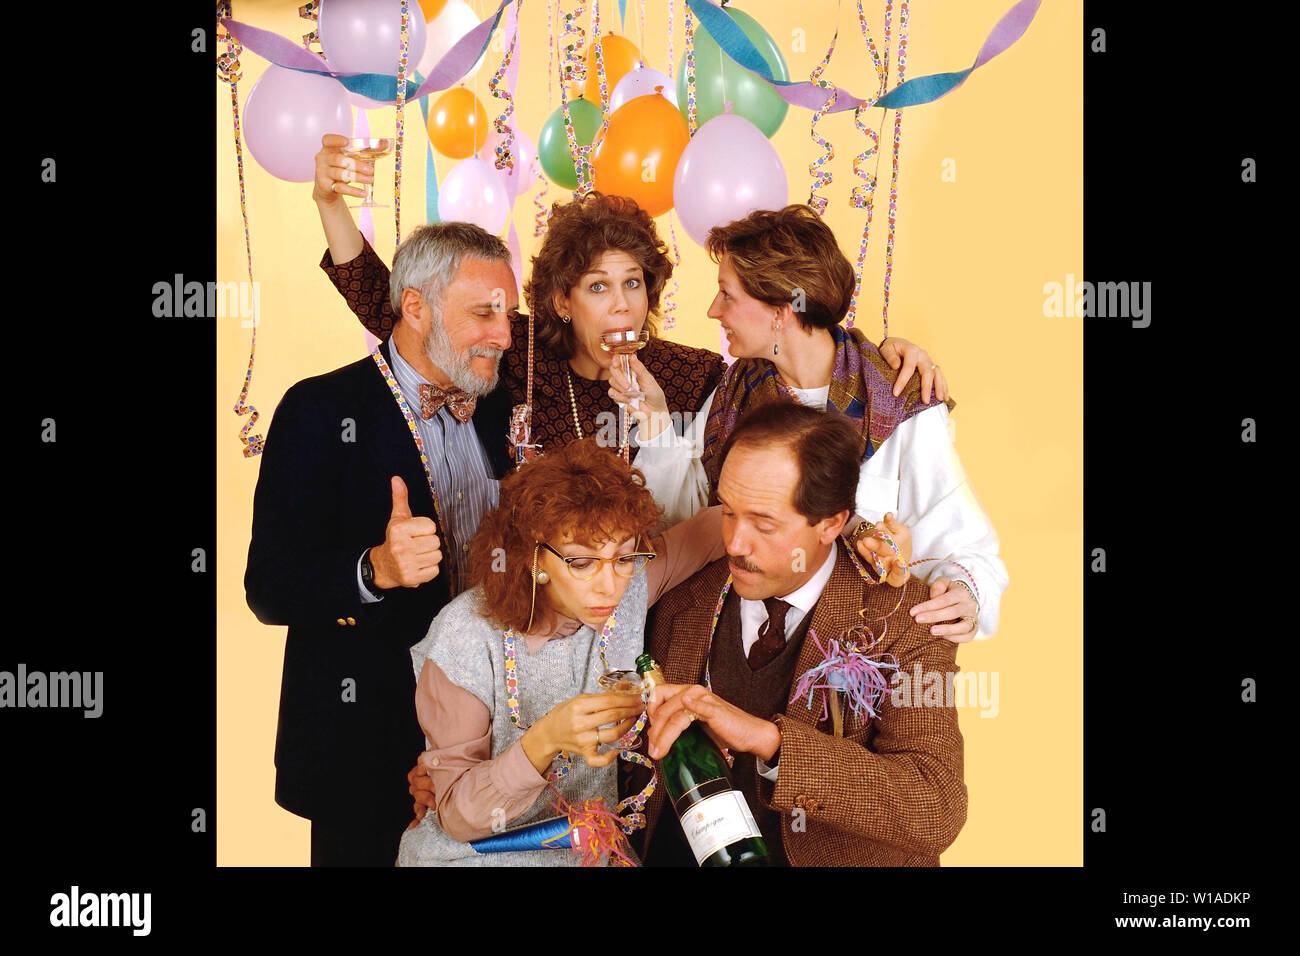 Five people celebrating at an office party a decorated room Stock Photo